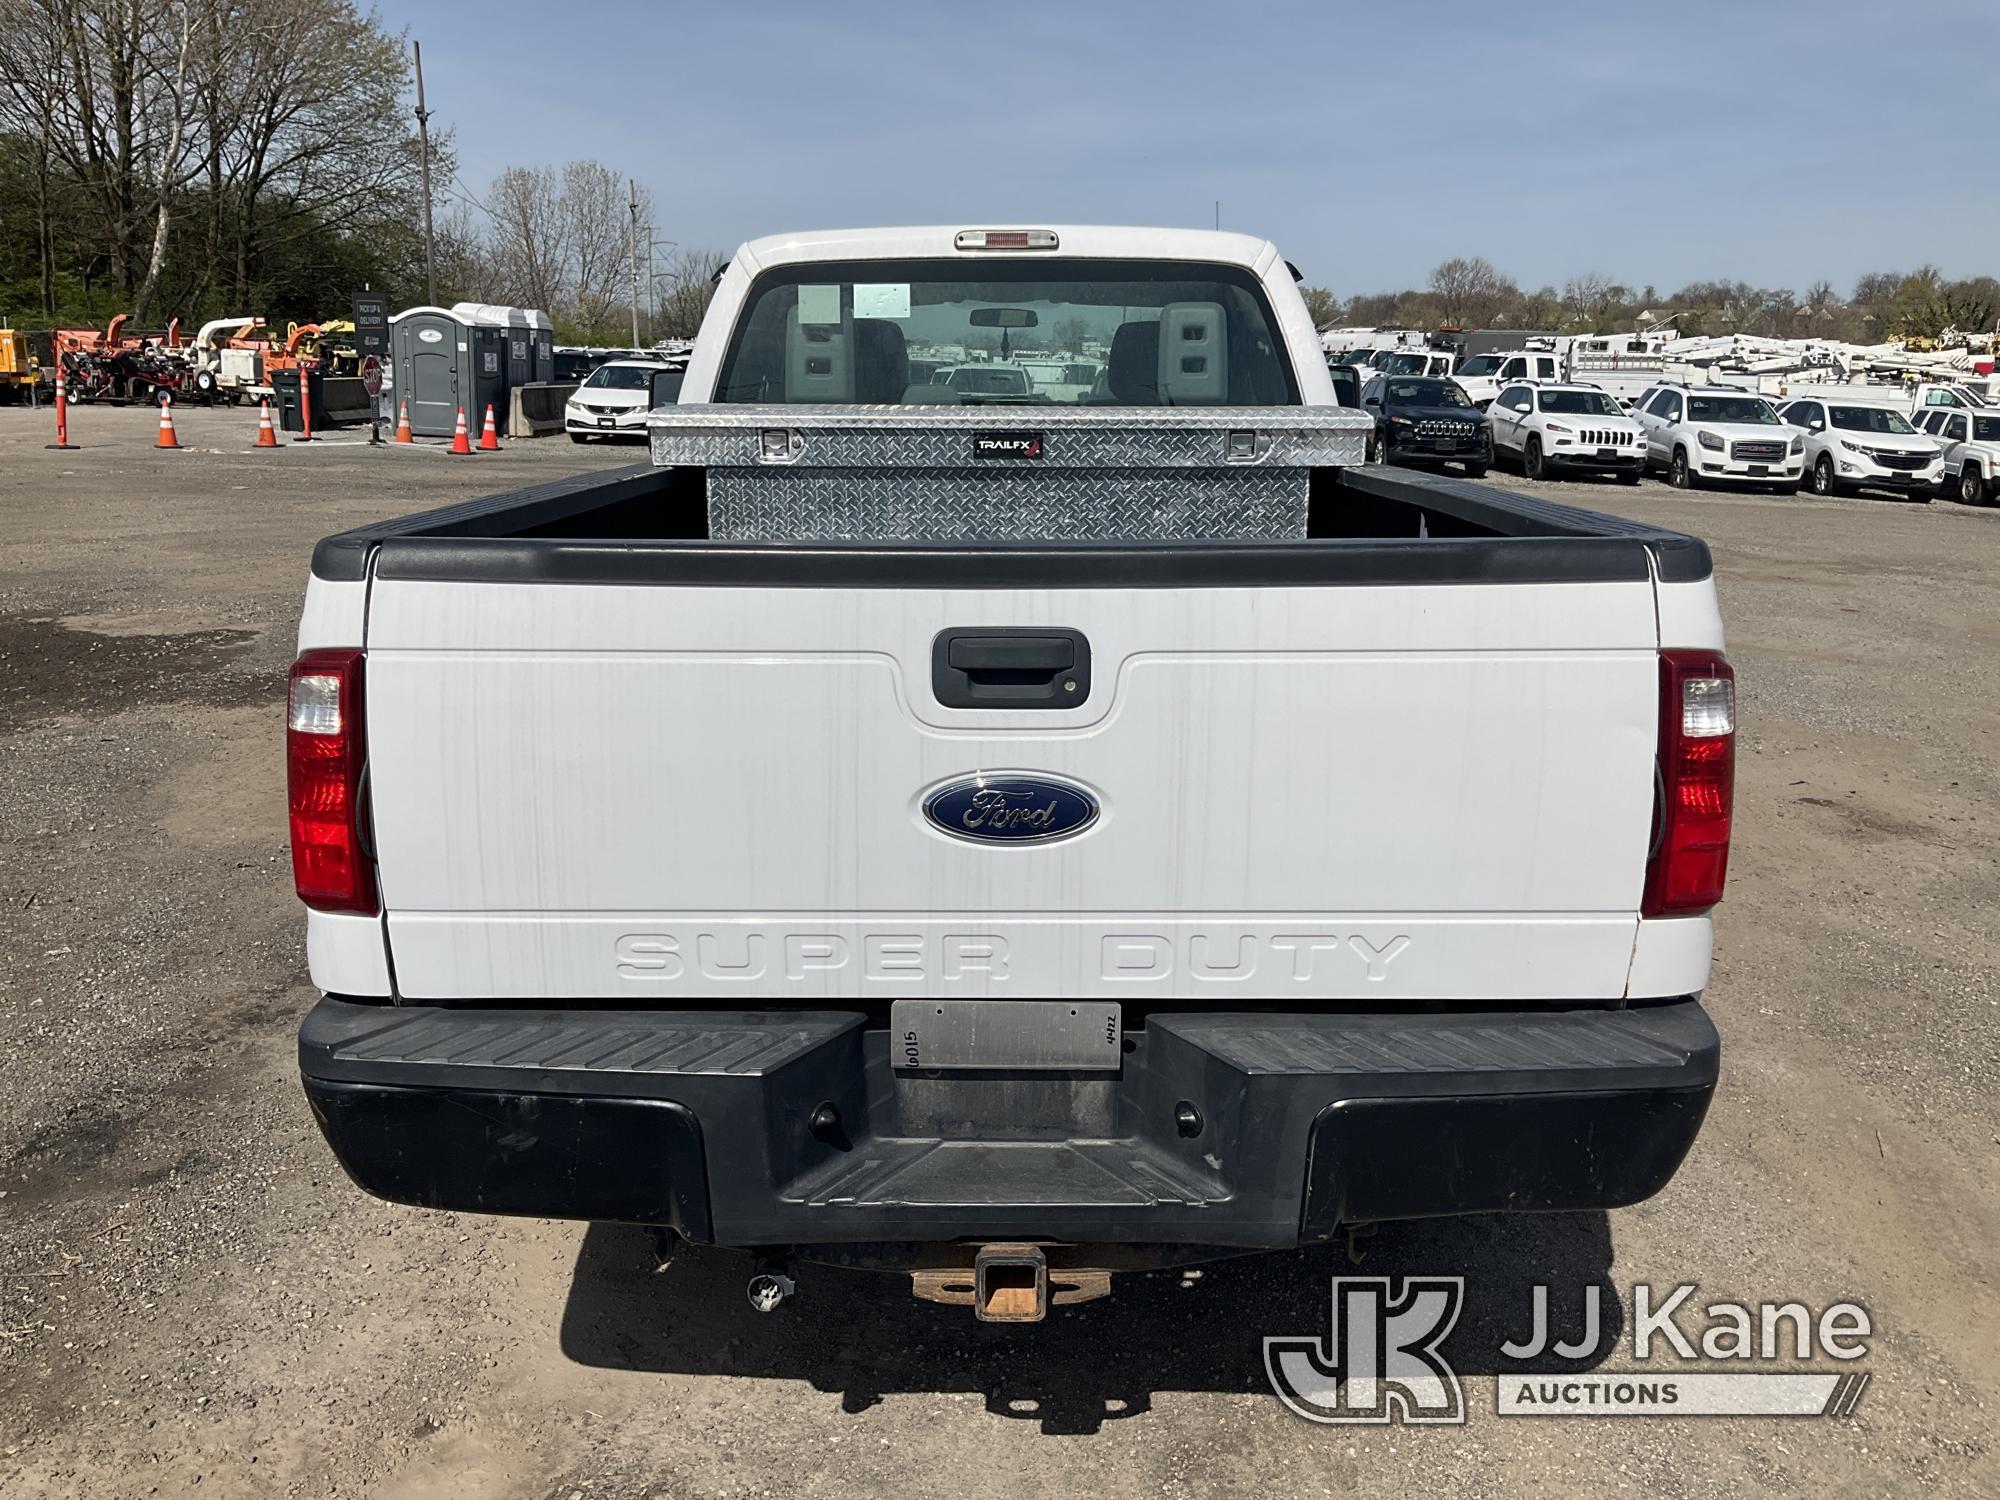 (Plymouth Meeting, PA) 2016 Ford F250 4x4 Extended-Cab Pickup Truck Runs & Moves, Body & Rust Damage